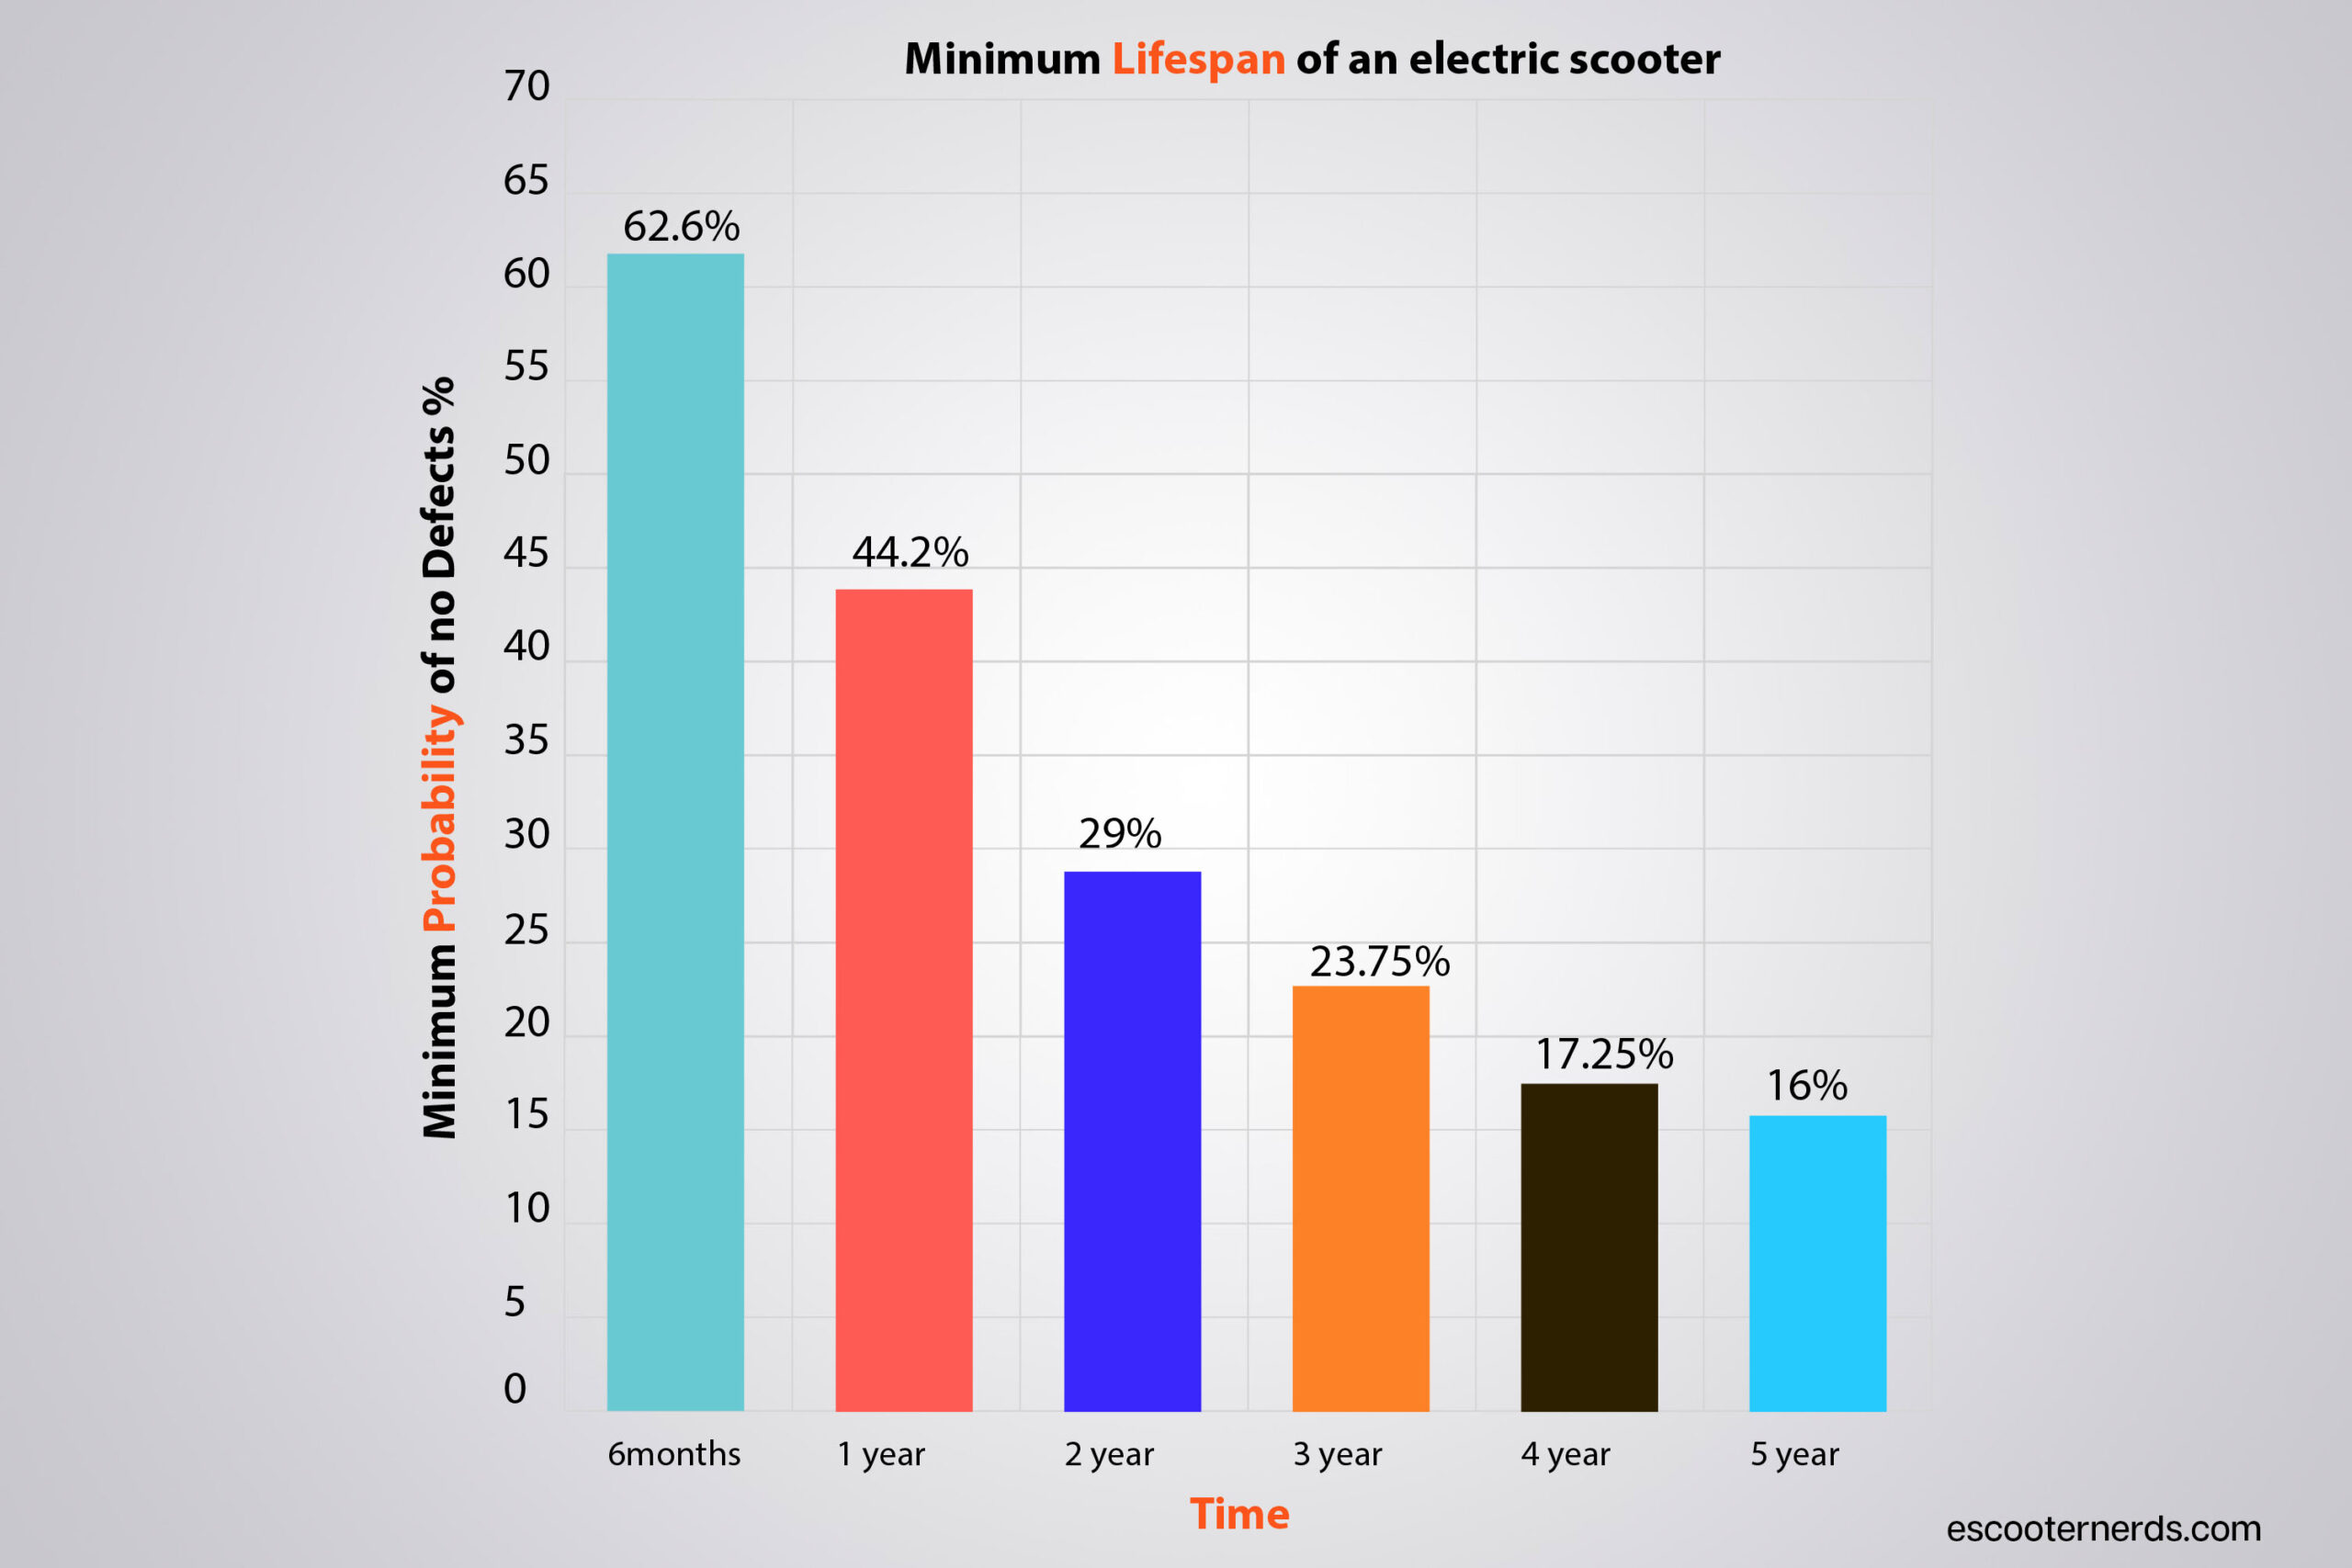 Minimum Lifespan of an electric scooter